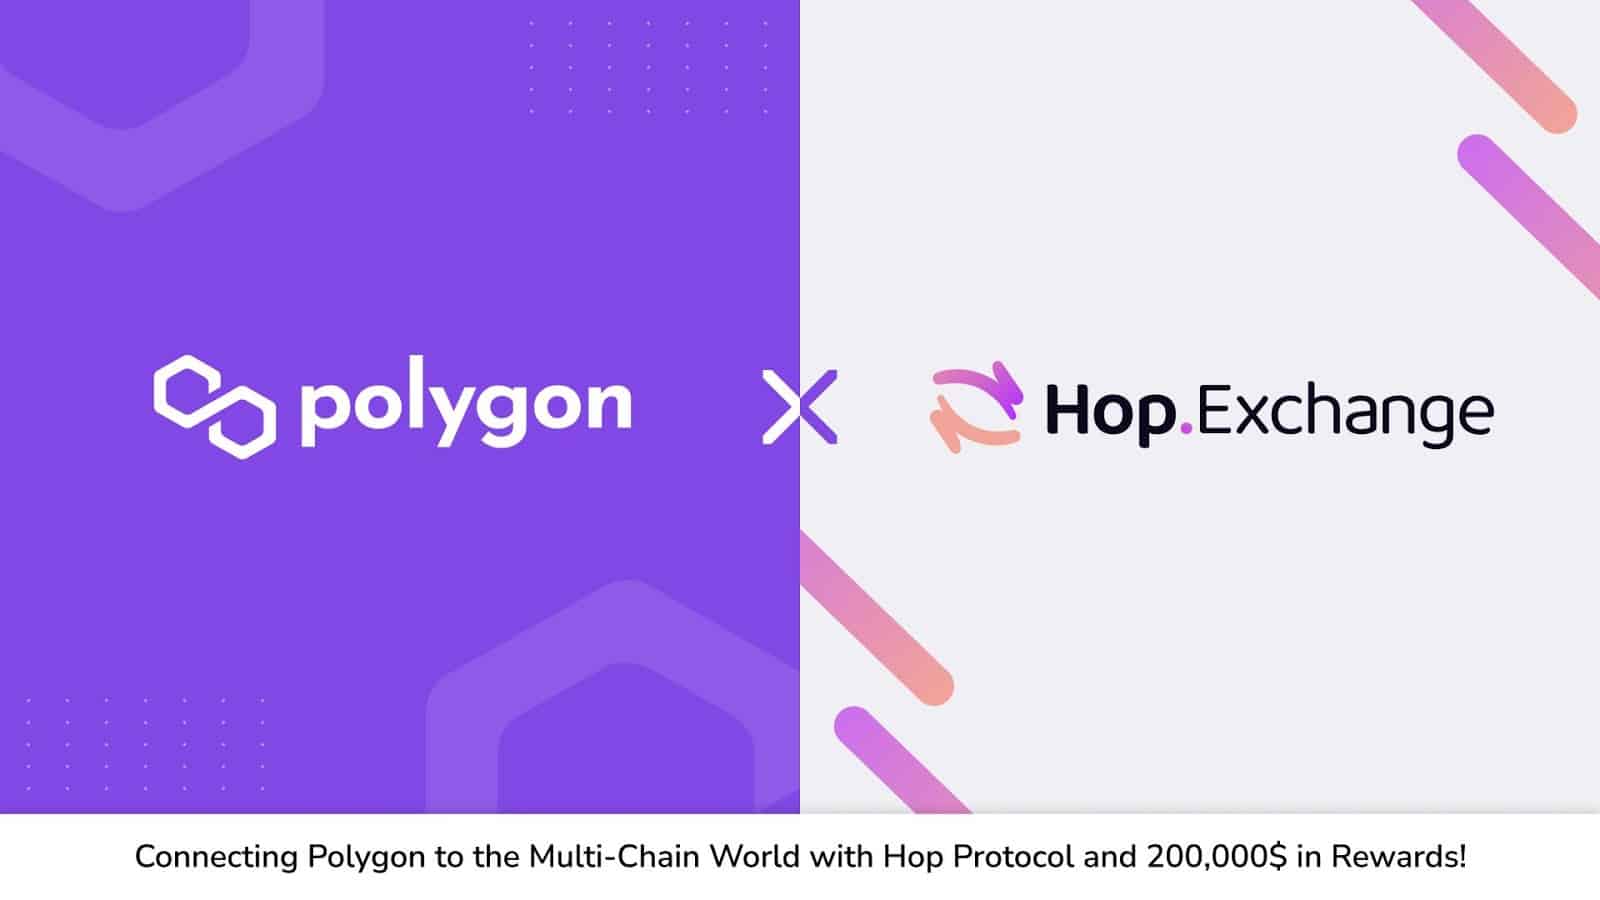 Connecting-polygon-to-the-multi-chain-world-via-hop-protocol-with-$200,000-in-liquidity-rewards